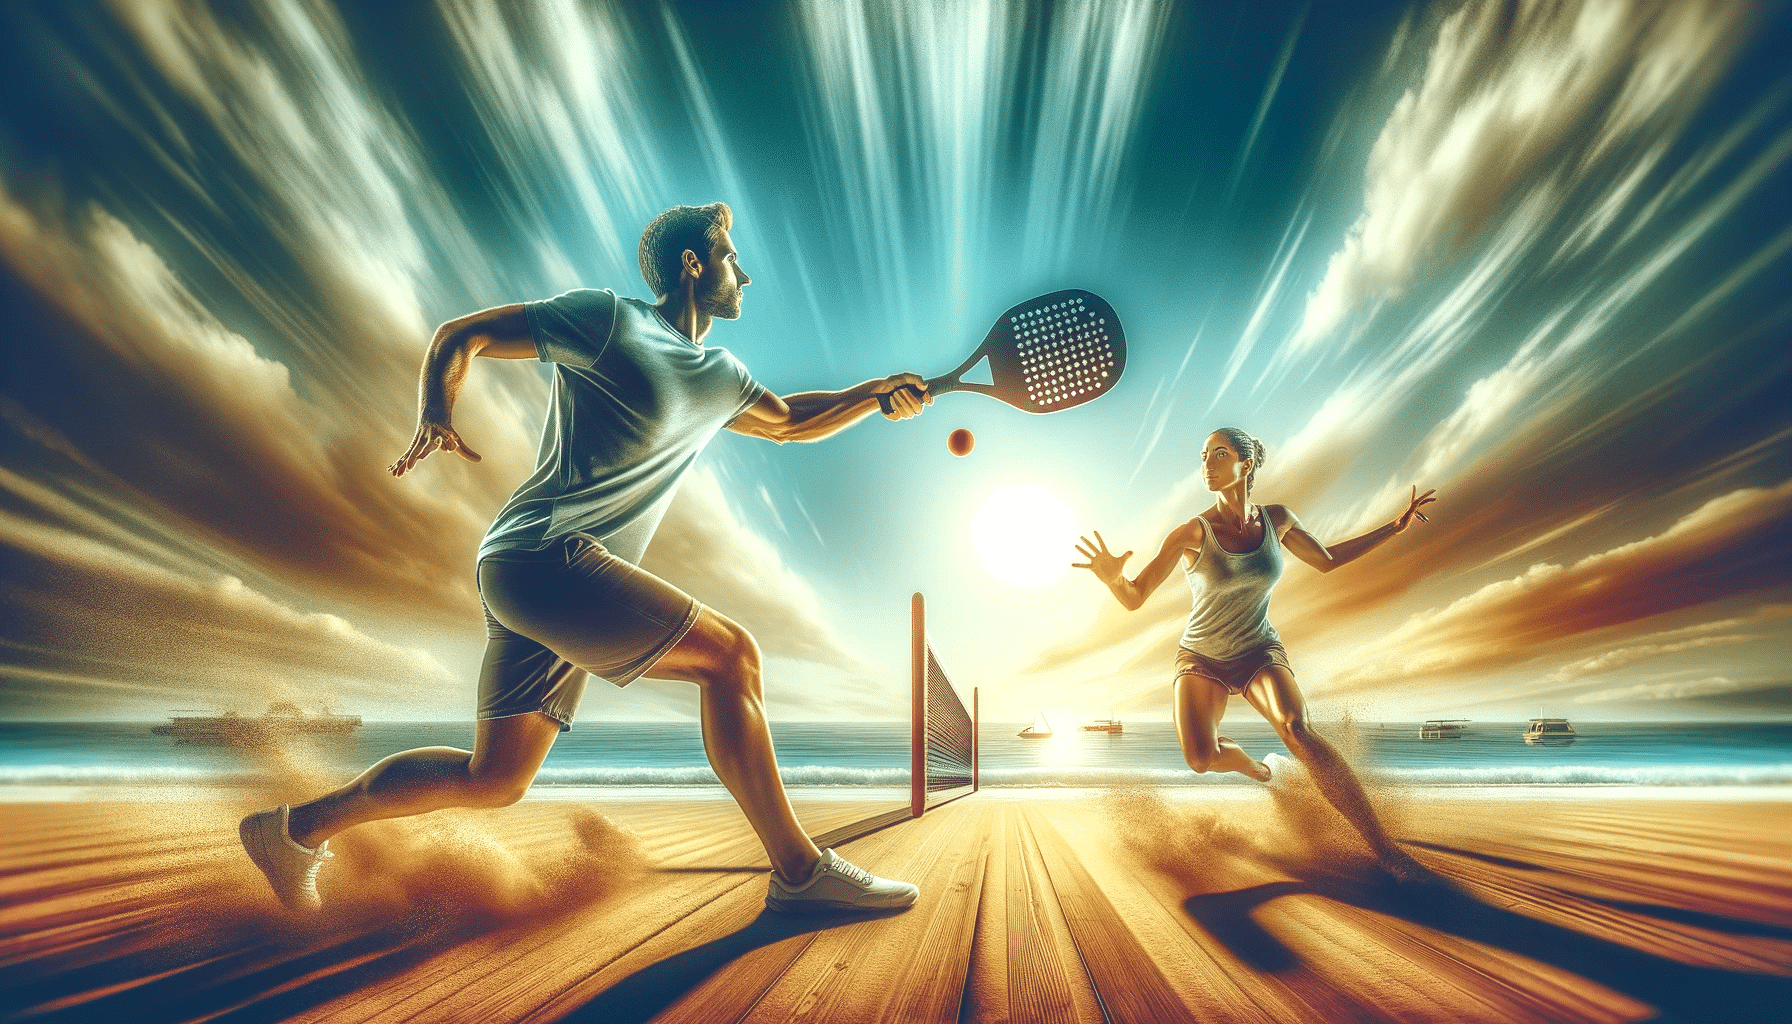 A-dynamic-and-engaging-horizontal-image-illustrating-the-health-benefits-of-paddle-tennis-for-cardiovascular-health.-The-scene-is-set-on-a-beautiful.png